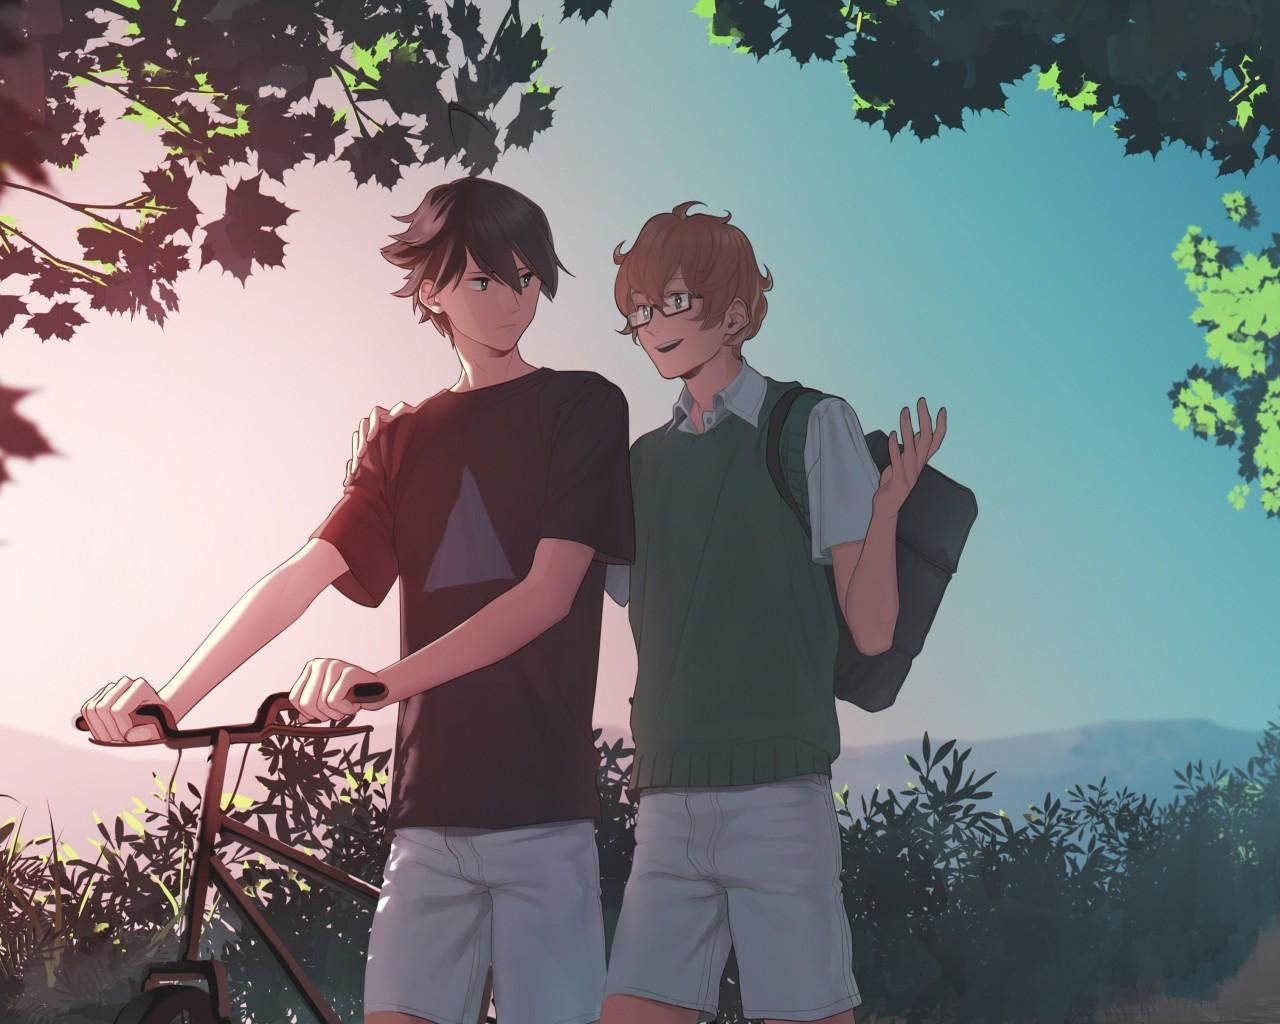 Download 1280x1024 Anime Boys, Friends, Bicycle, Walking